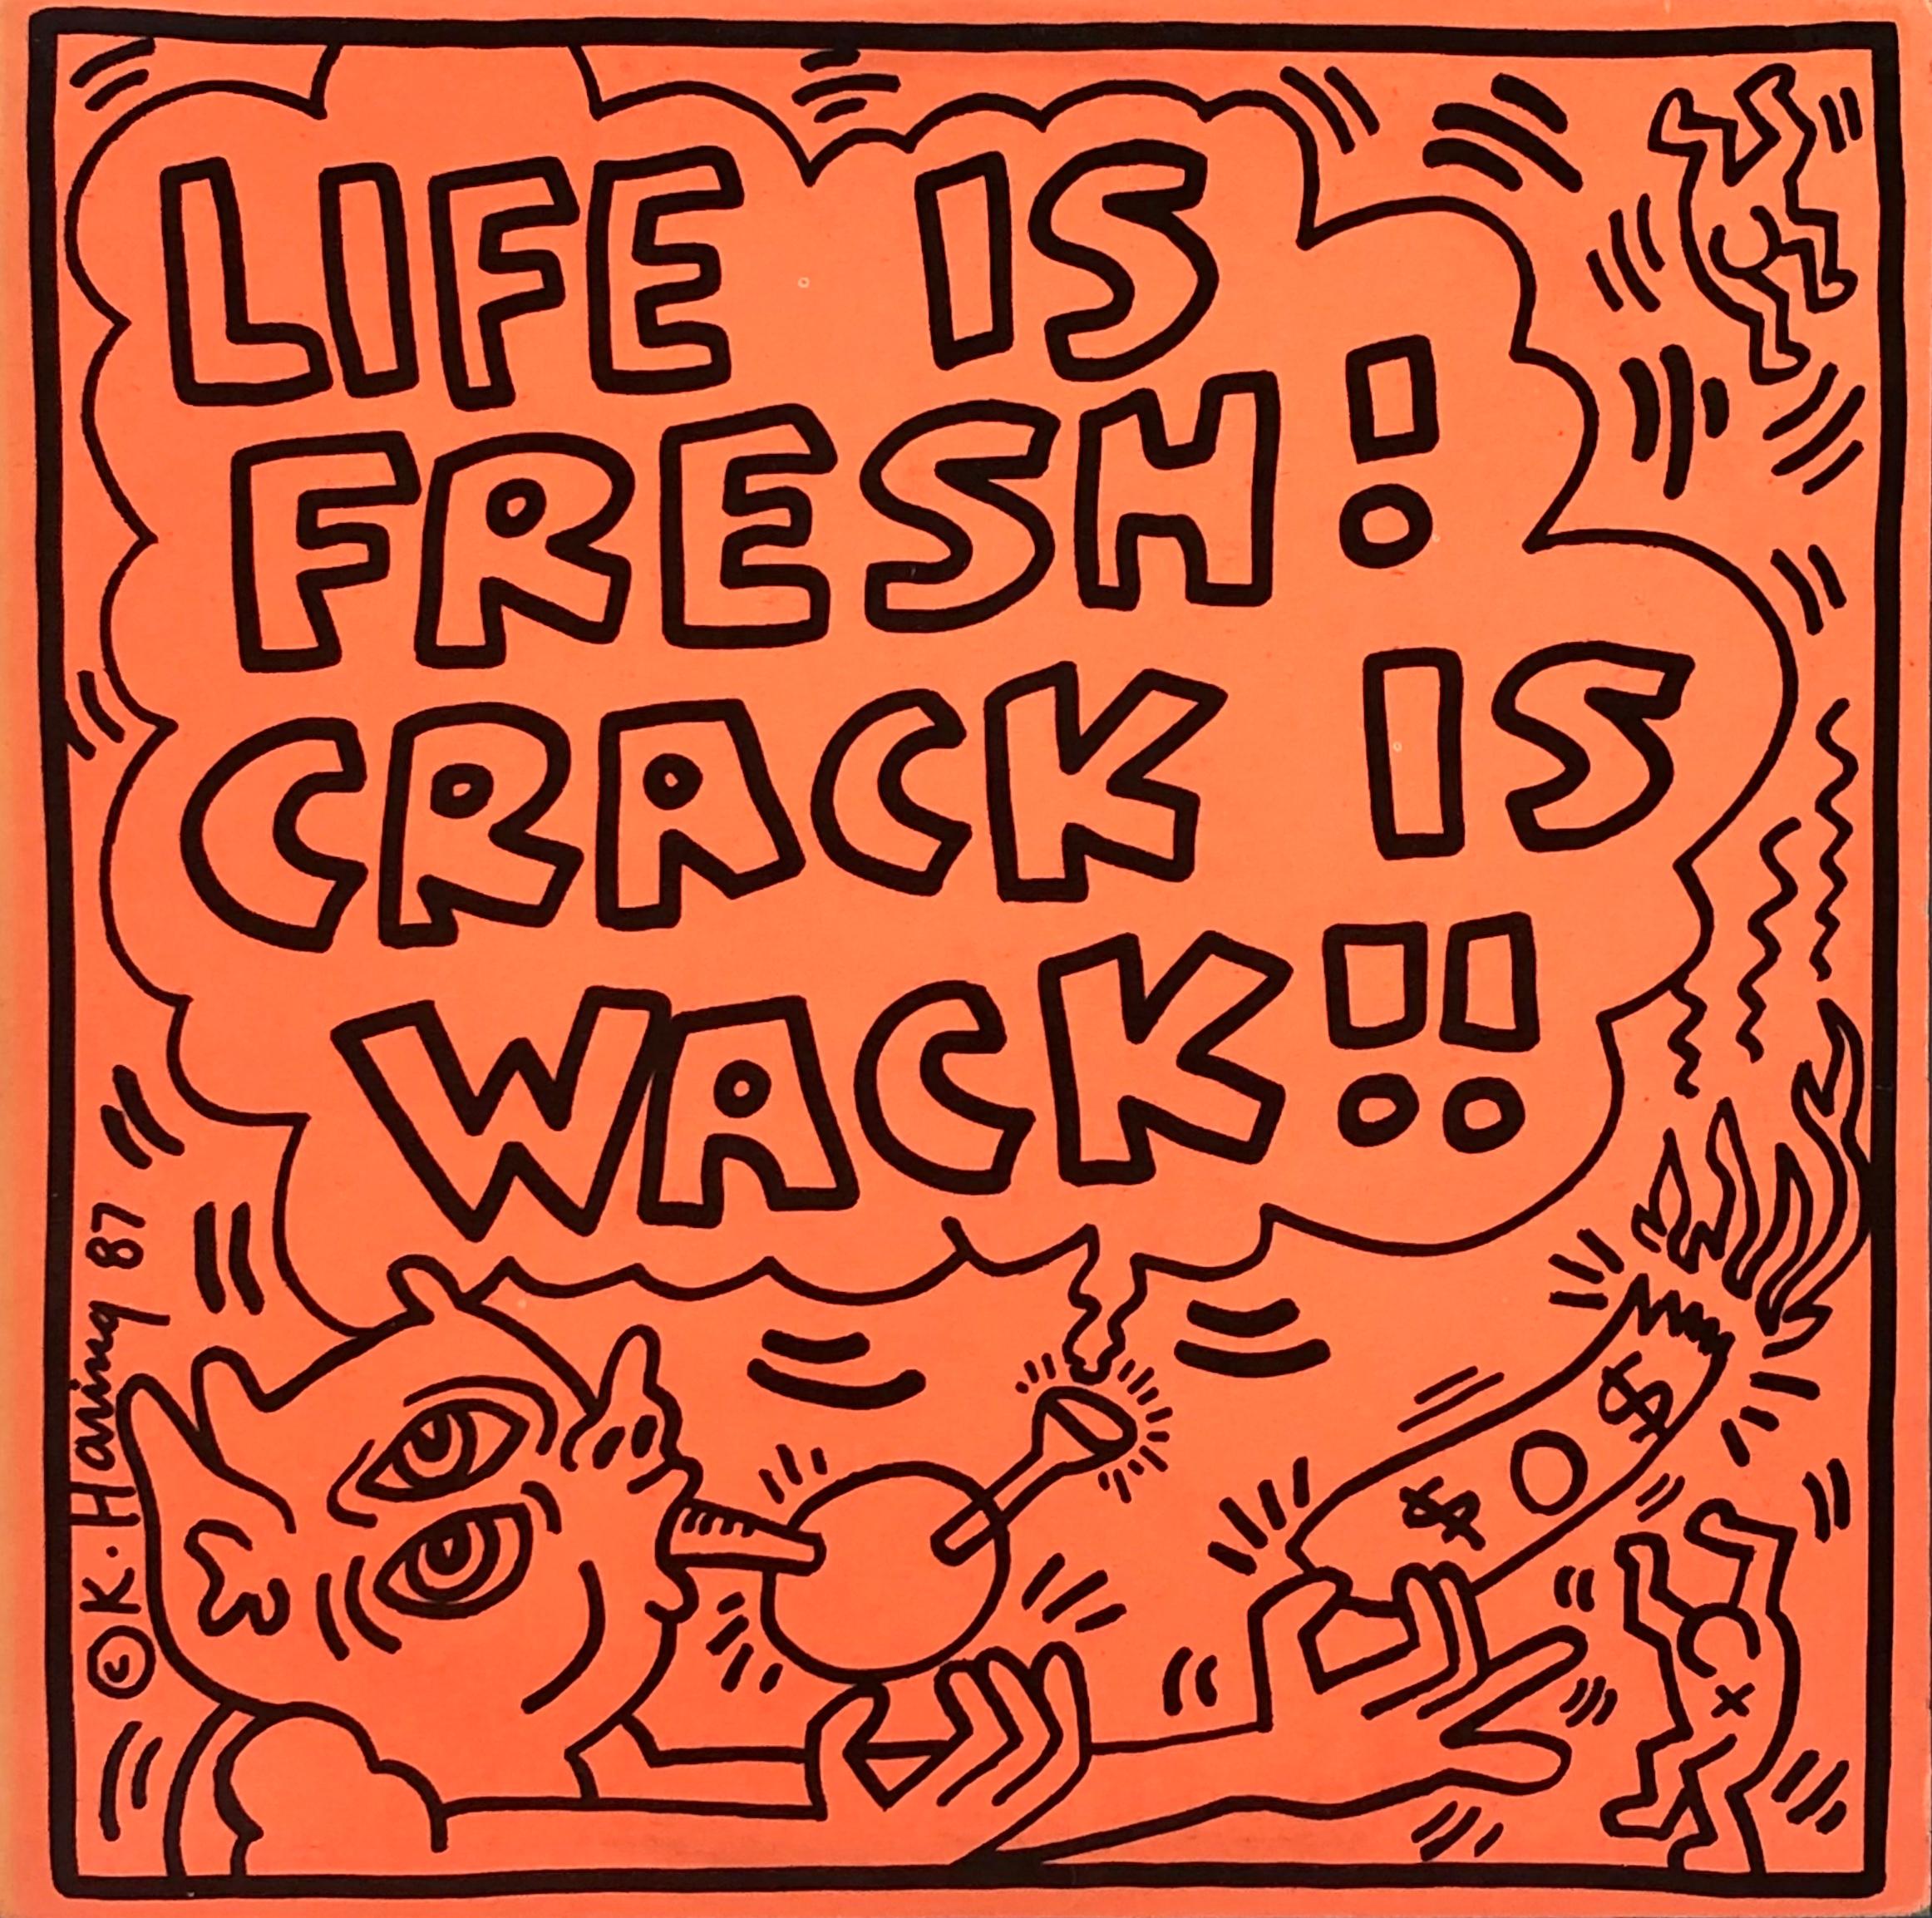 Rare Keith Haring “Life is Fresh! Crack Is Wack!” 1987:
A highly sought-after 1980s record album featuring original artwork by Keith Haring. Among the most difficult to find of Keith Haring record illustrations. 

Keith Haring's cover illustration